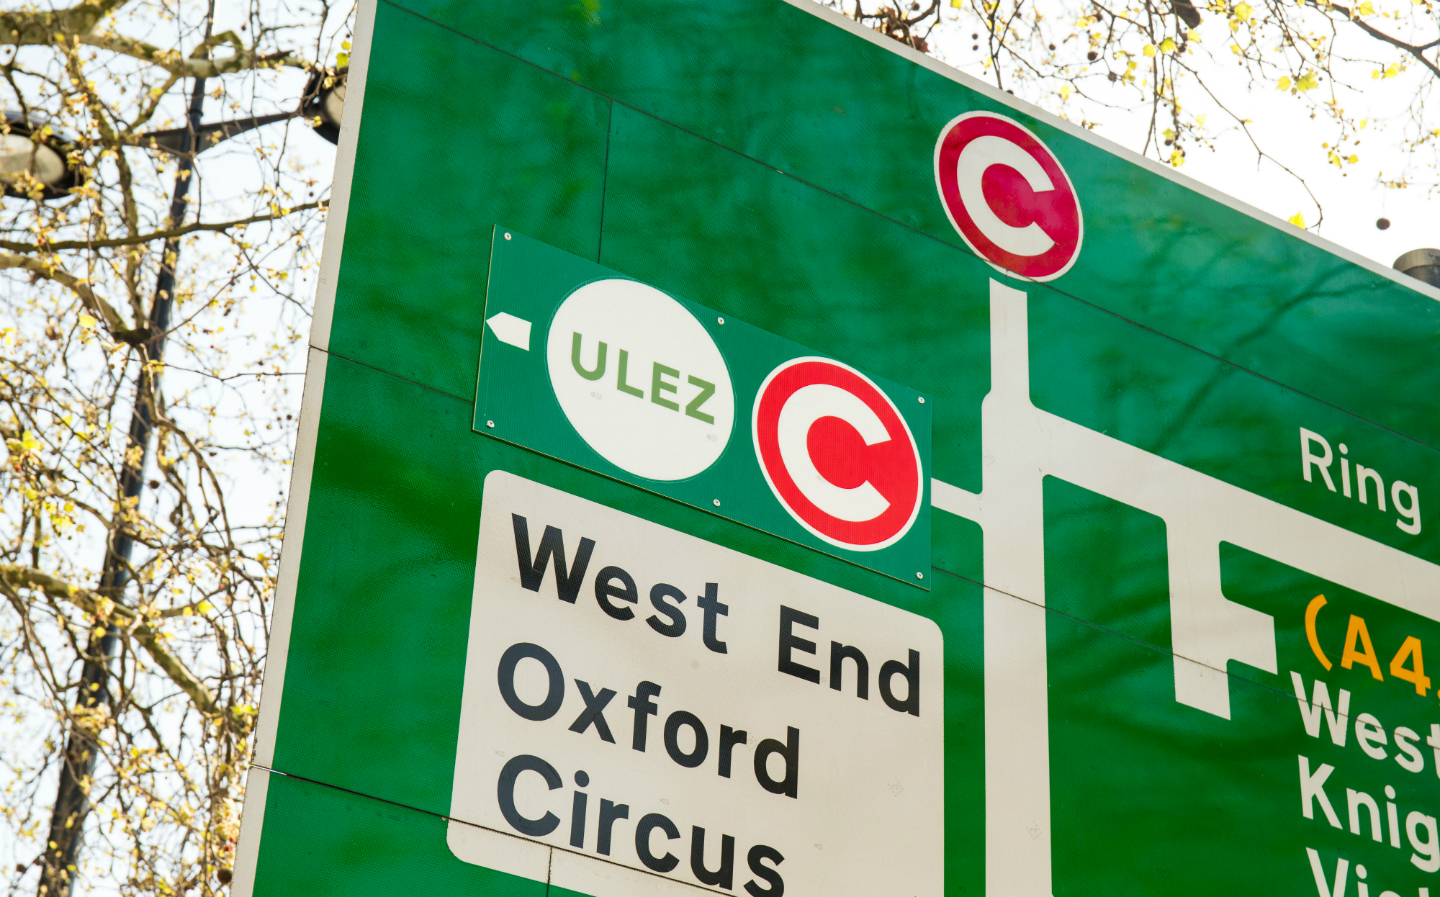 London ULEZ roll-out sees polluting car numbers fall by a quarter